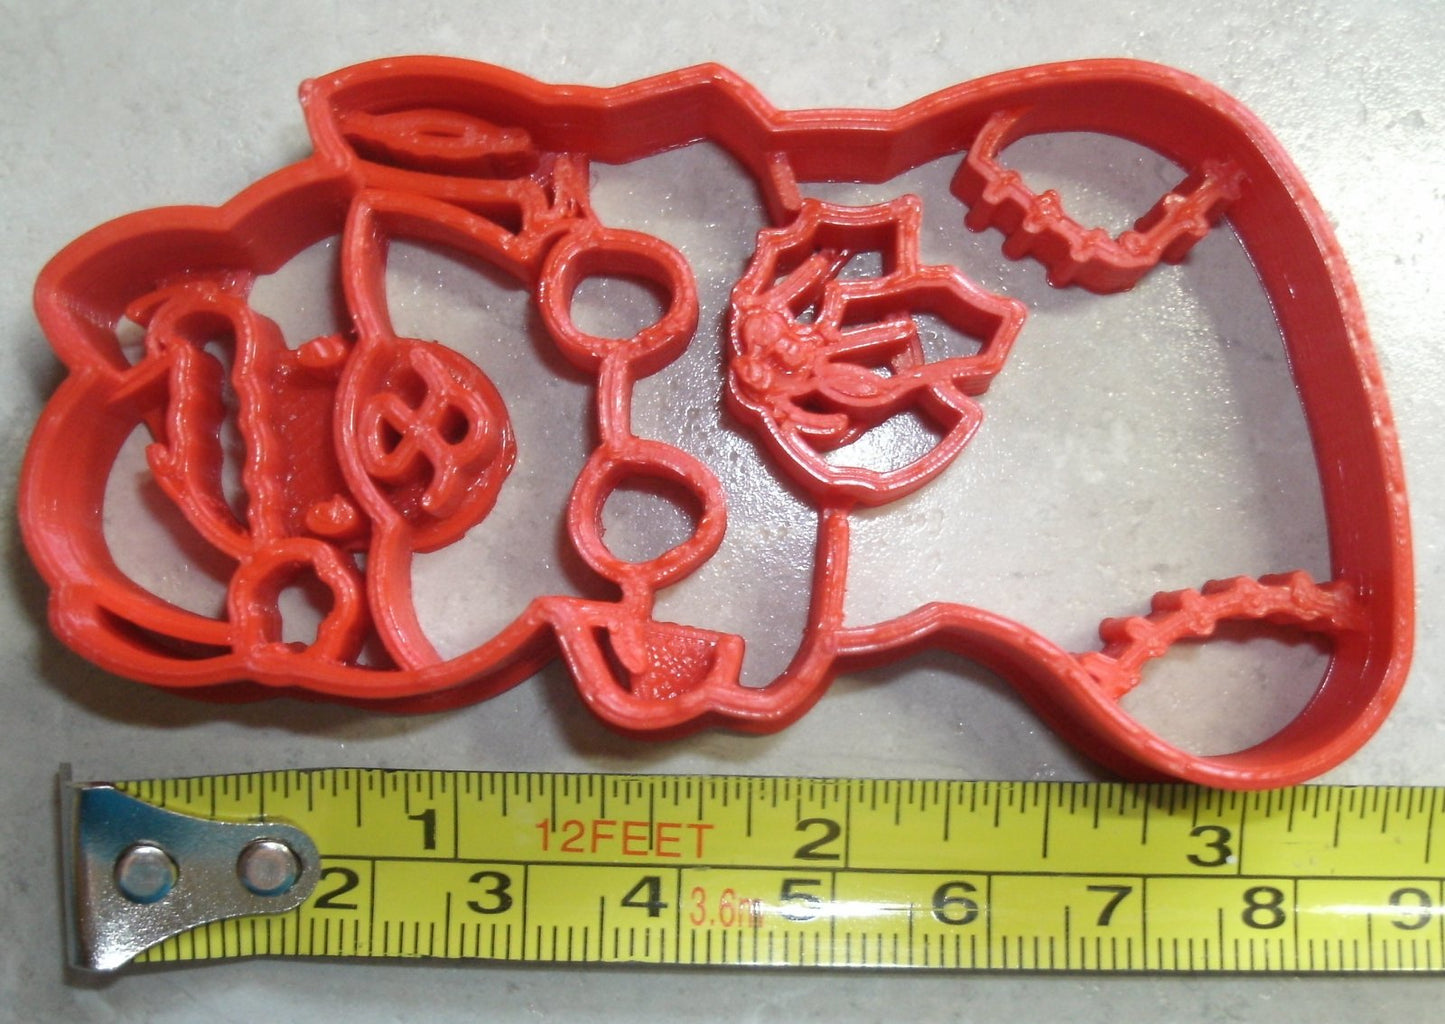 Cat In Stocking Christmas Holiday Kitty Kitten Animal Cookie Cutter USA PR2369